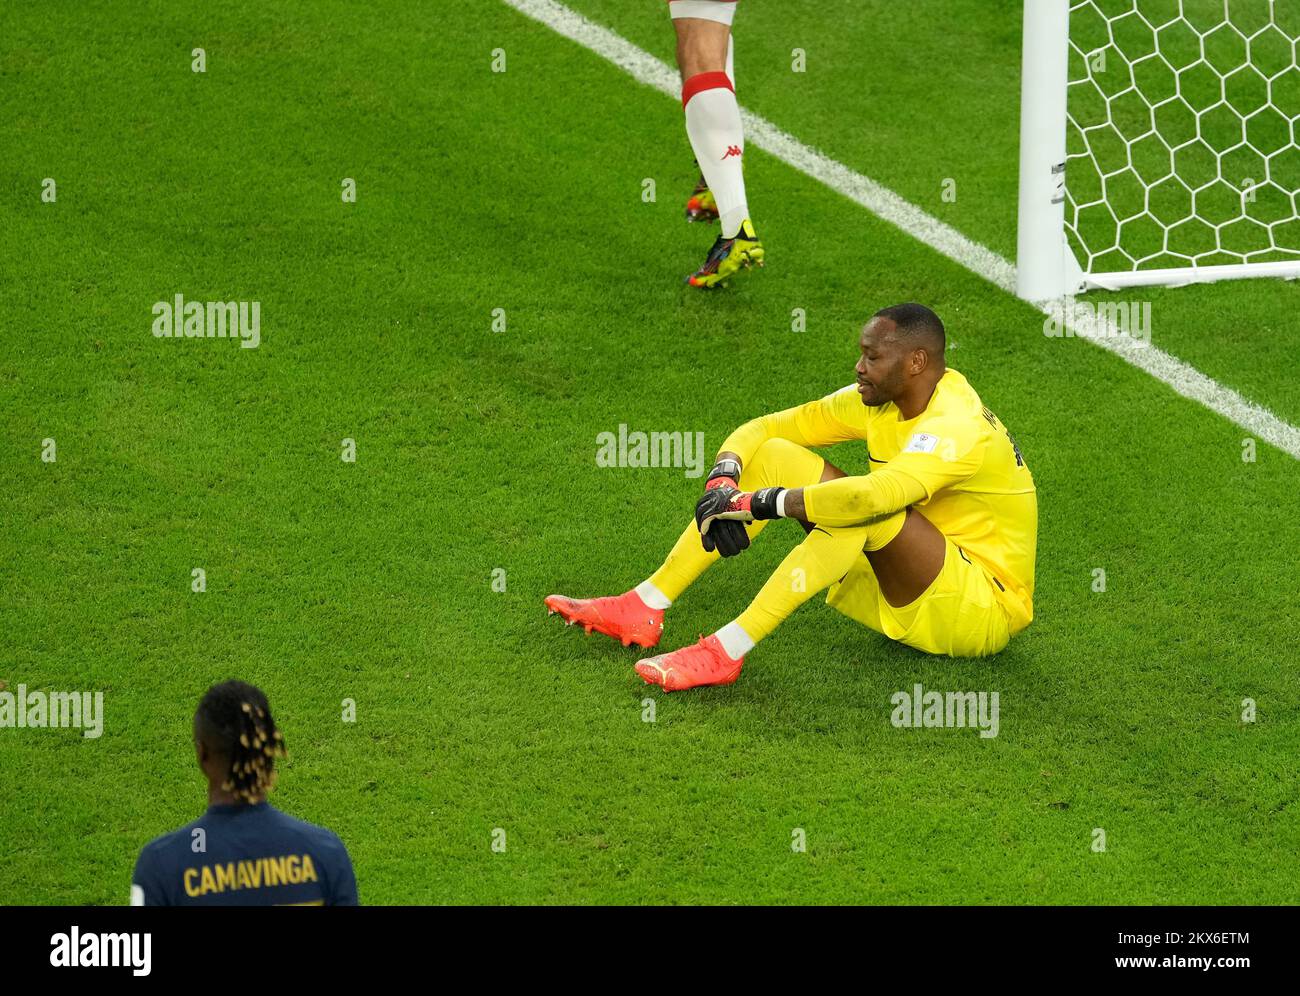 Al Rayyan, Qatar. 30th Nov, 2022. Steve Mandanda, goalkeeper of France, reacts after Nader Ghandri of Tunisia scores a goal which later is rules out for offside during the Group D match between Tunisia and France at the 2022 FIFA World Cup at Education City Stadium in Al Rayyan, Qatar, Nov. 30, 2022. Credit: Xiao Yijiu/Xinhua/Alamy Live News Stock Photo